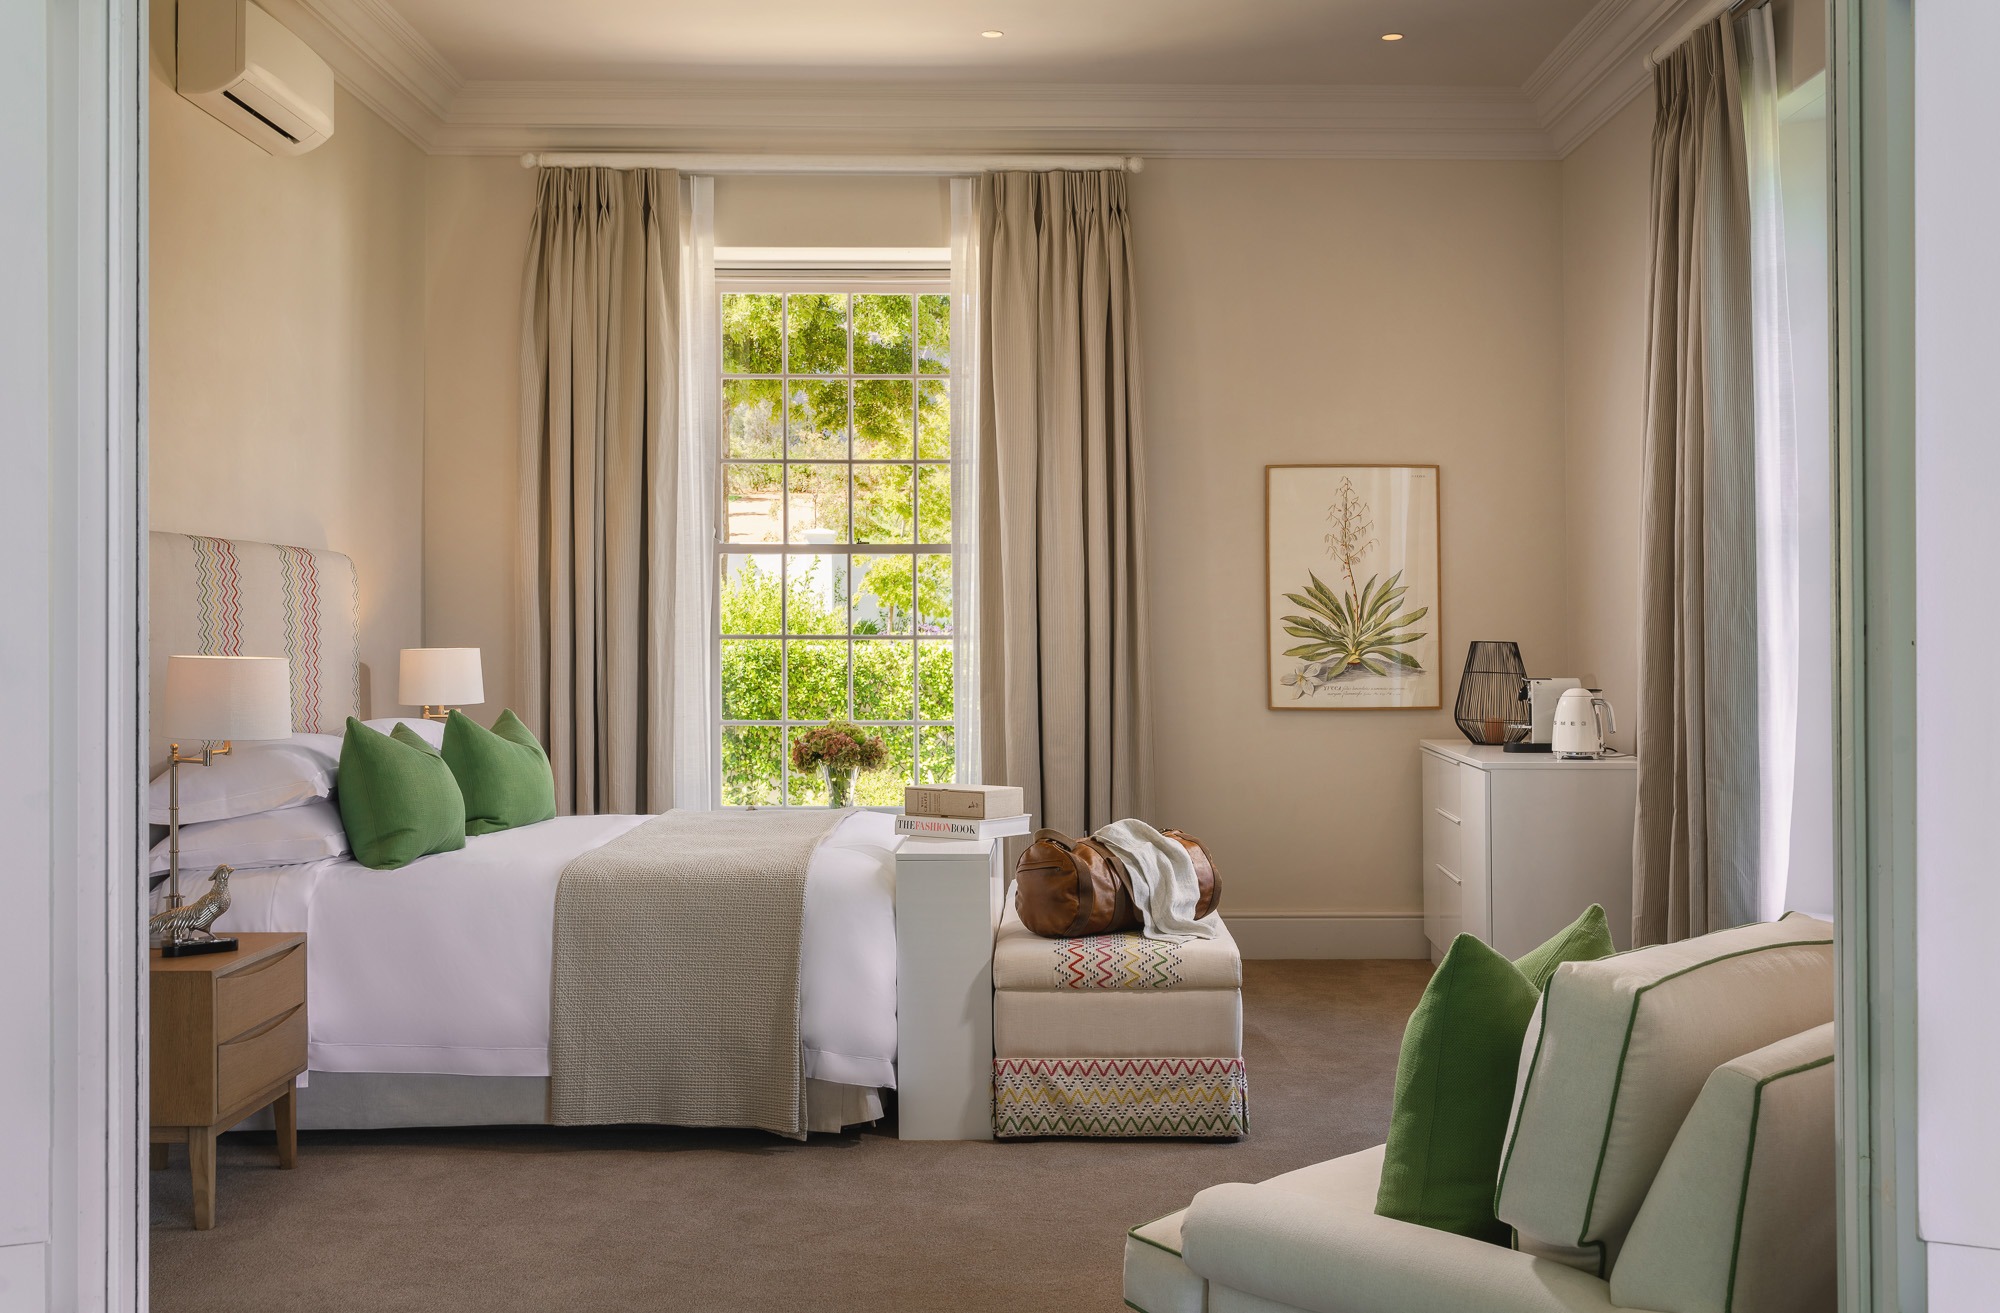 Brookdale Manor House Suite, a romantic room opening out to the gardens